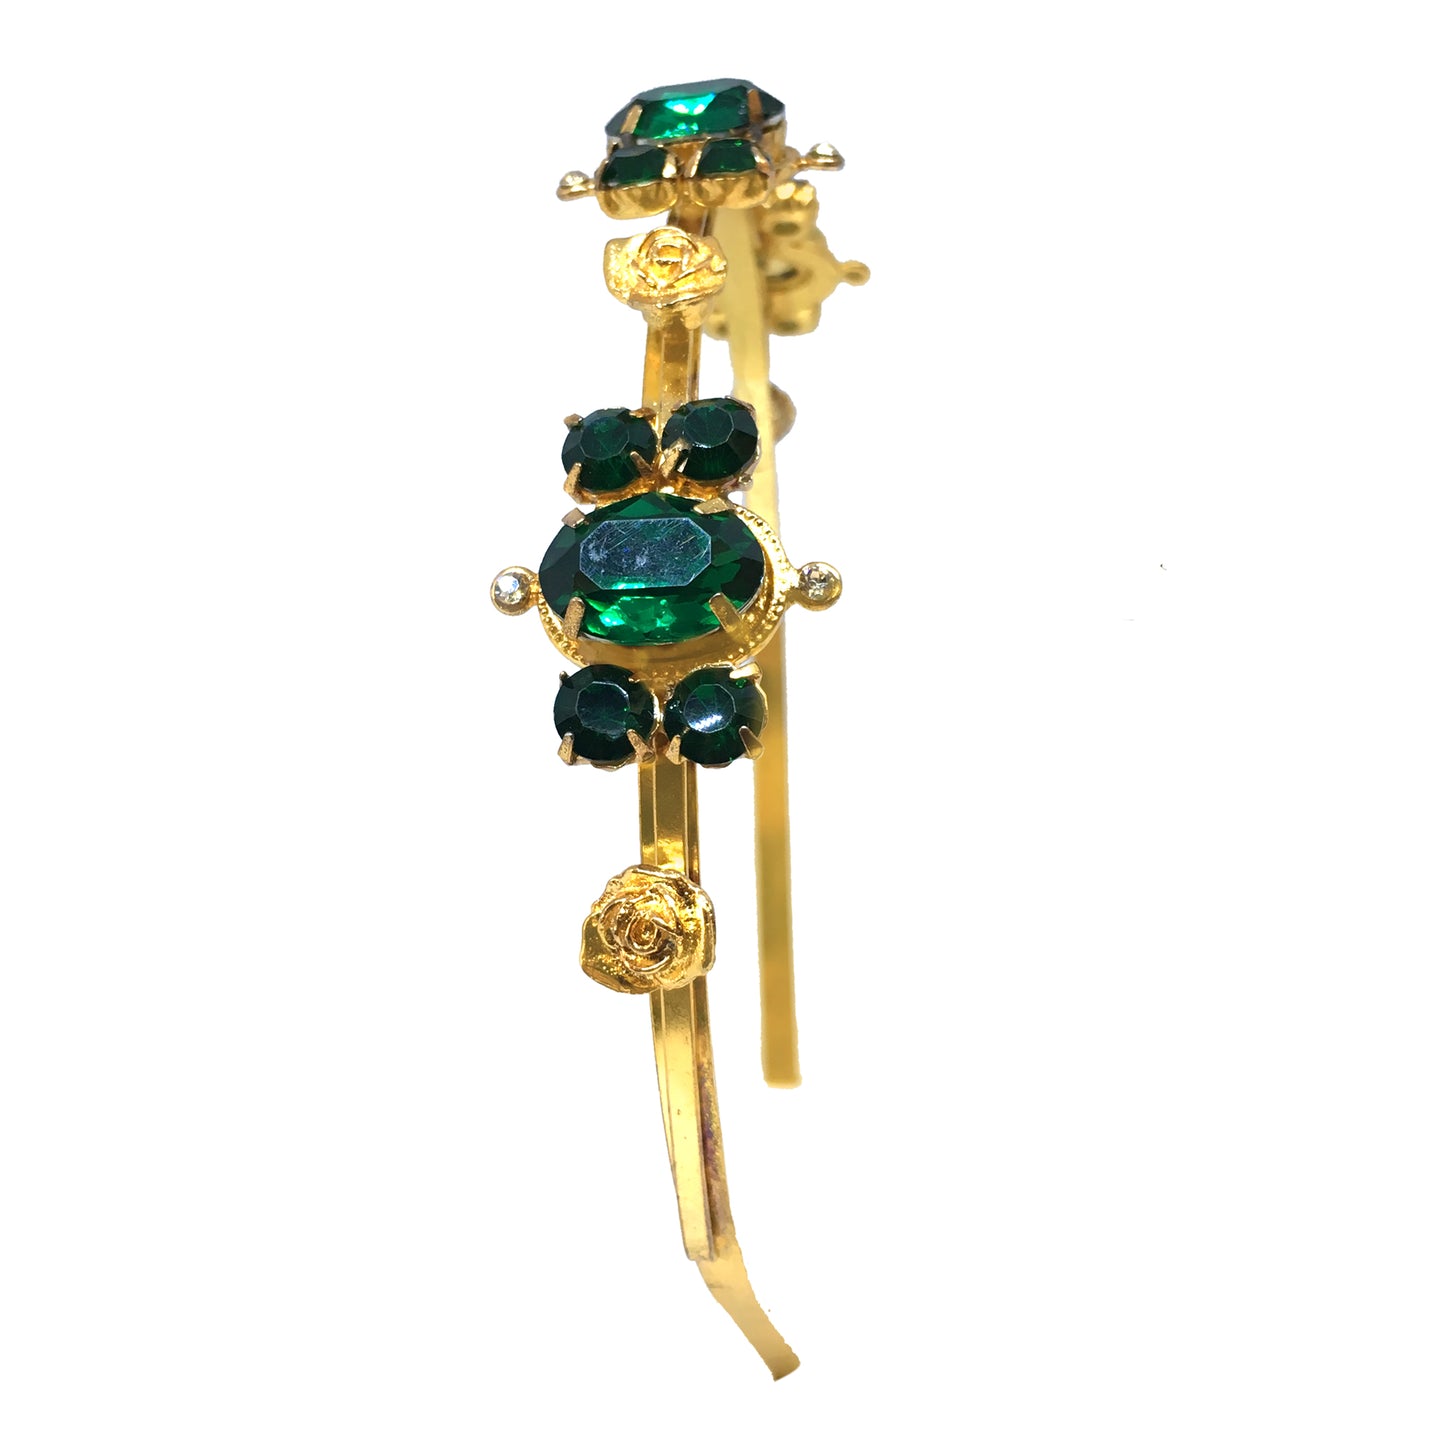 22K Gold Plated  Emerald Rose Hairband